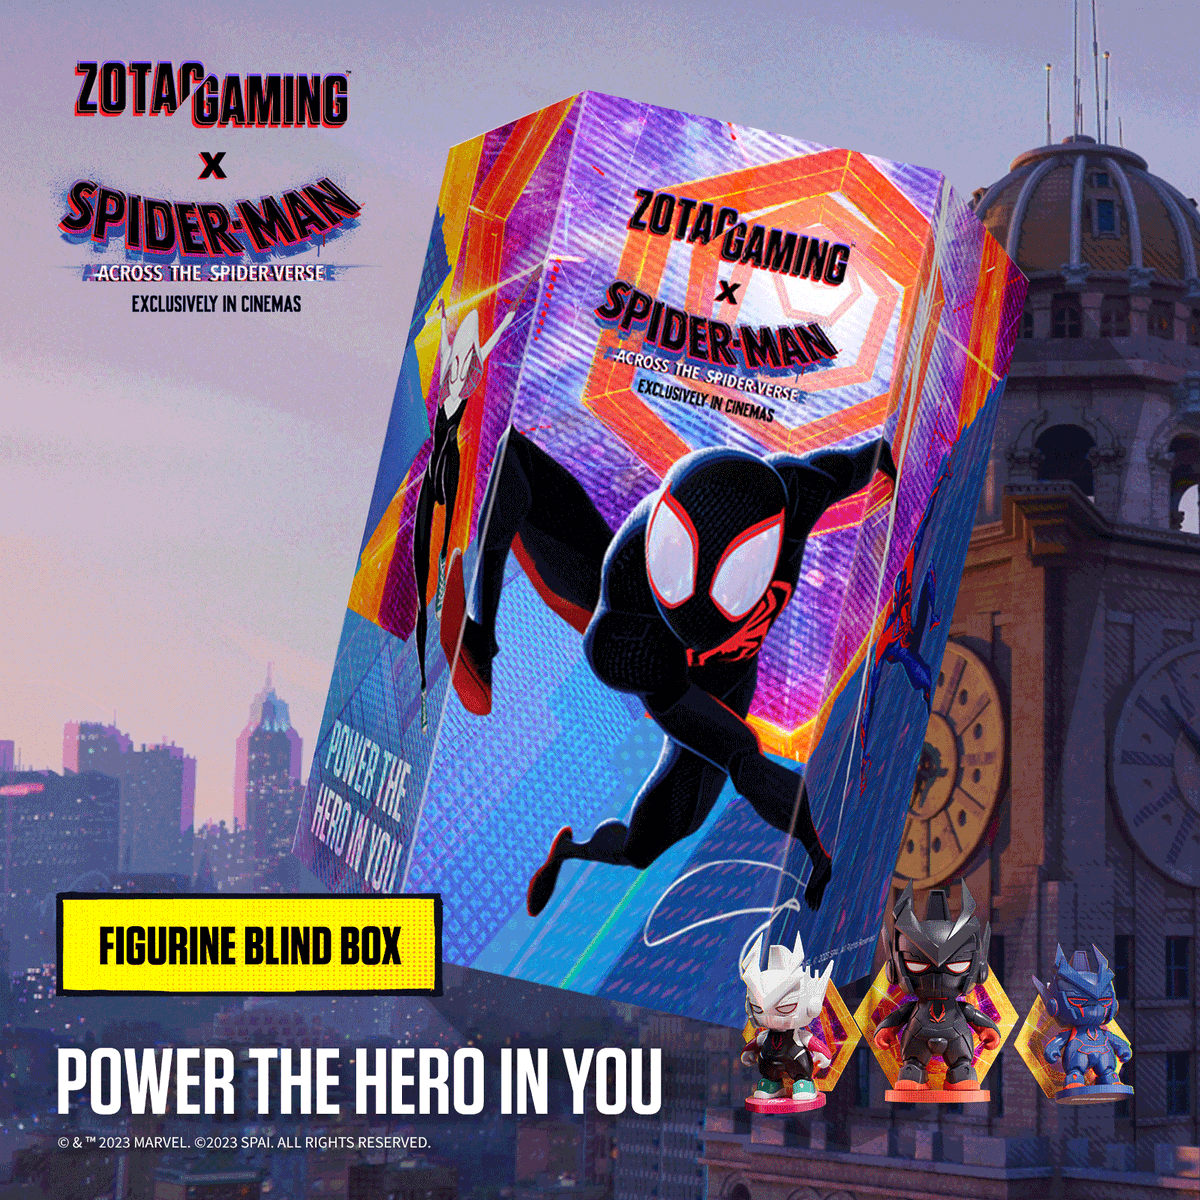 Which is your favourite ZTORM figure?

a. ZTORM as Spider-Man™
b. ZTORM as Spider-Gwen™
c. ZTORM as Spider-Man 2099™

See Spider-Man™: Across the Spider-Verse, exclusively in cinemas now 

#ZotacxSpiderversemovie #SpiderVerse #PowerUp #PowerTheHeroInYou #PowerTheWin #ZTORM